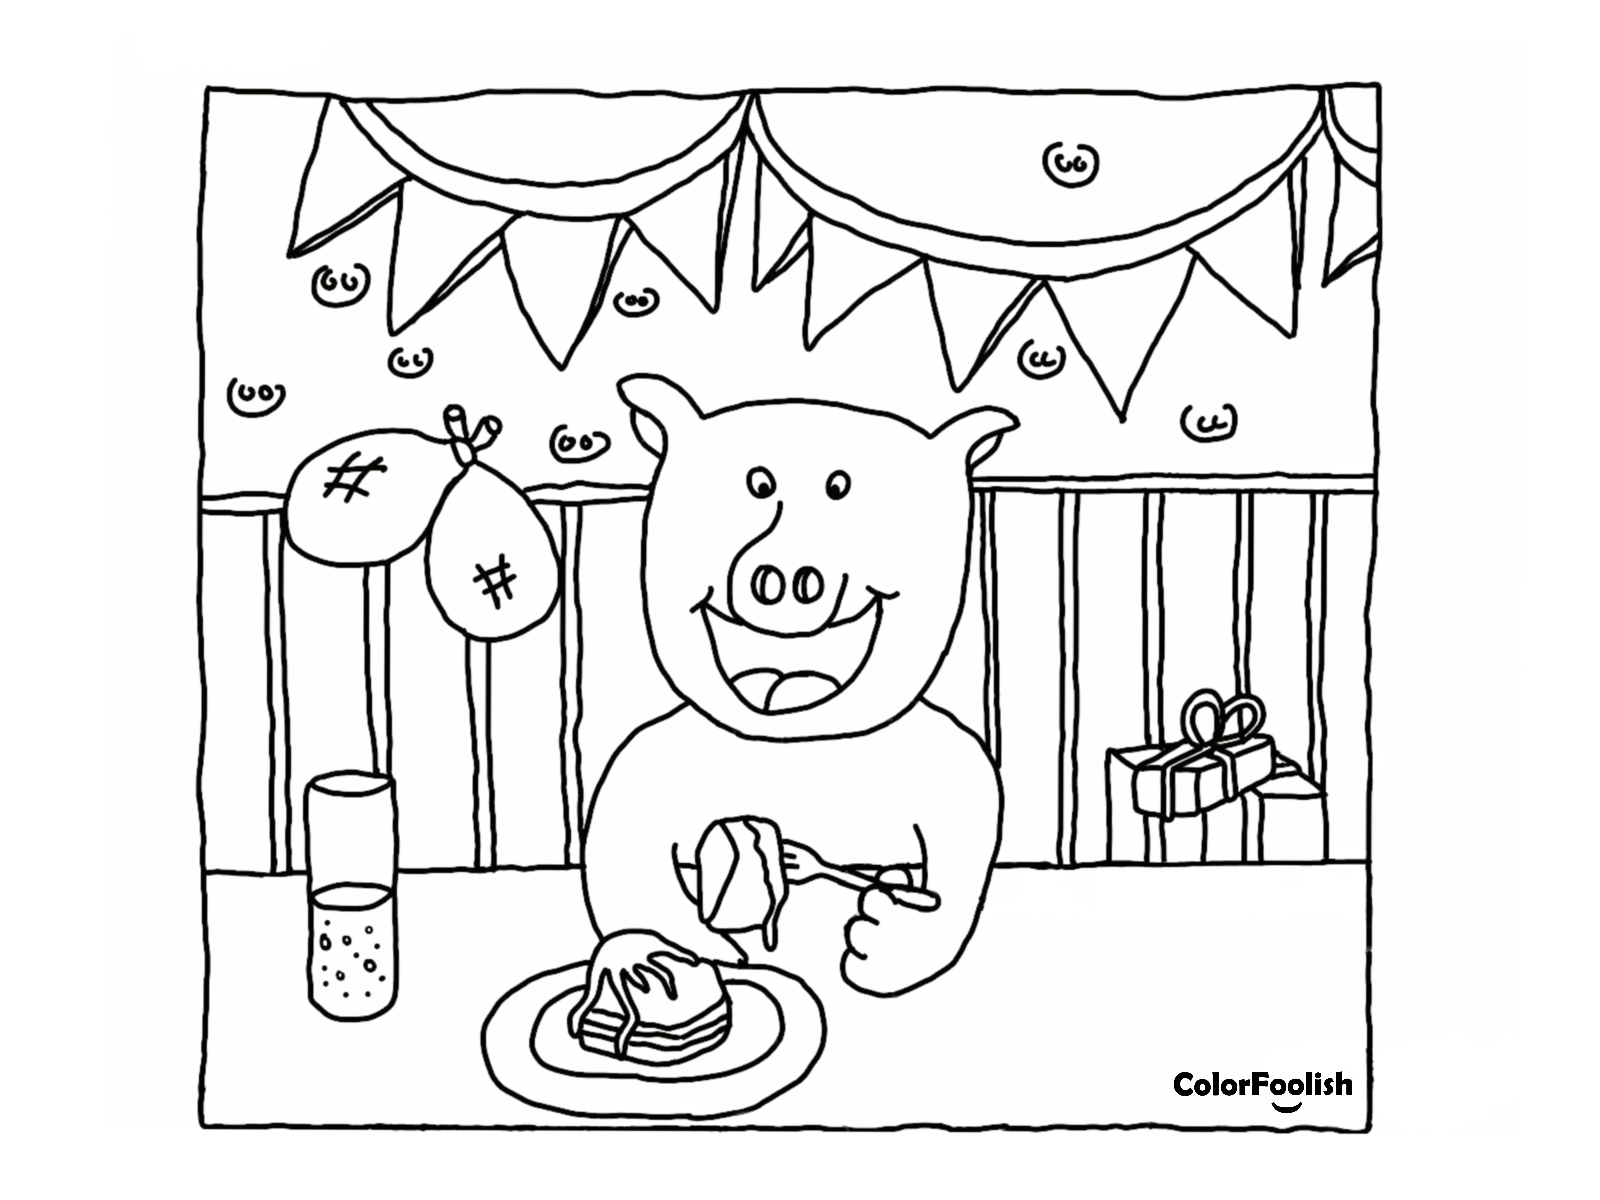 Coloring page of a pig eating cake